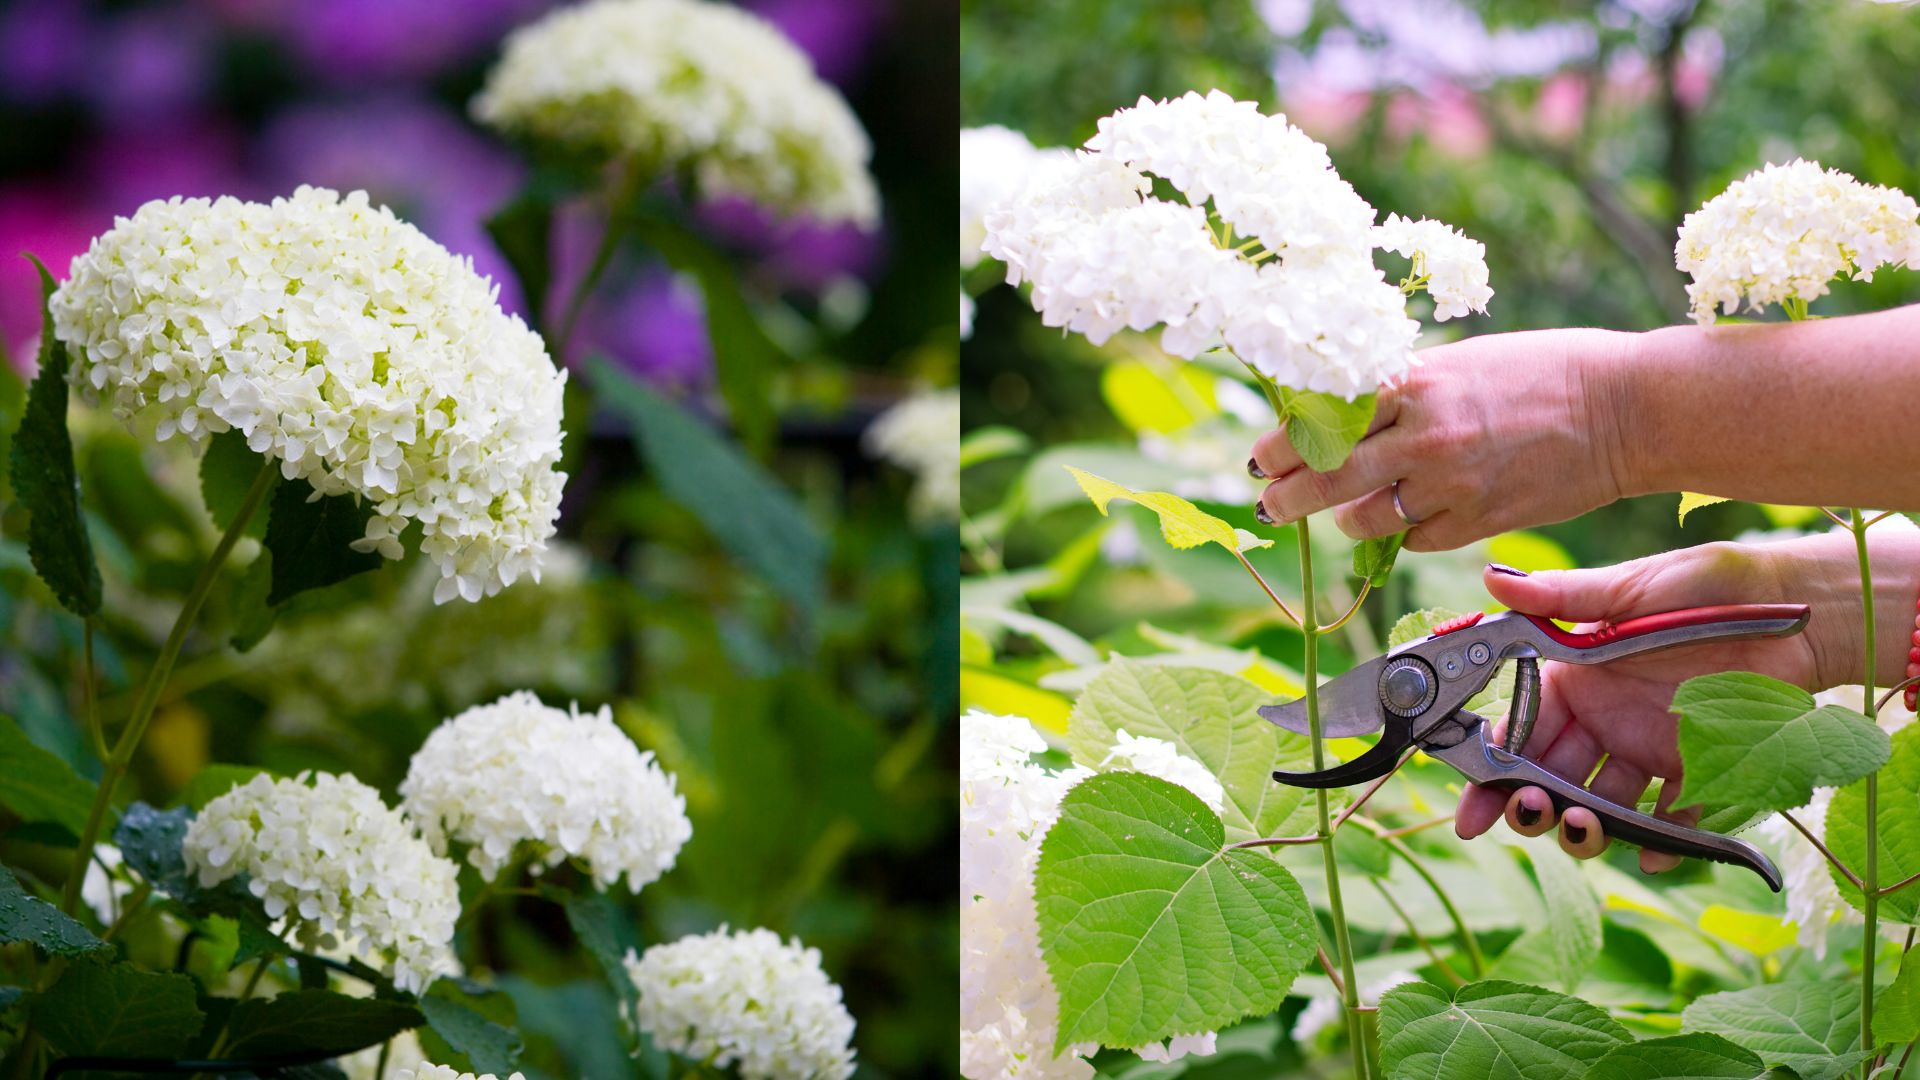 This Is When And How You Should Prune Annabelle Hydrangeas For Better Growth And More Stunning Blossoms